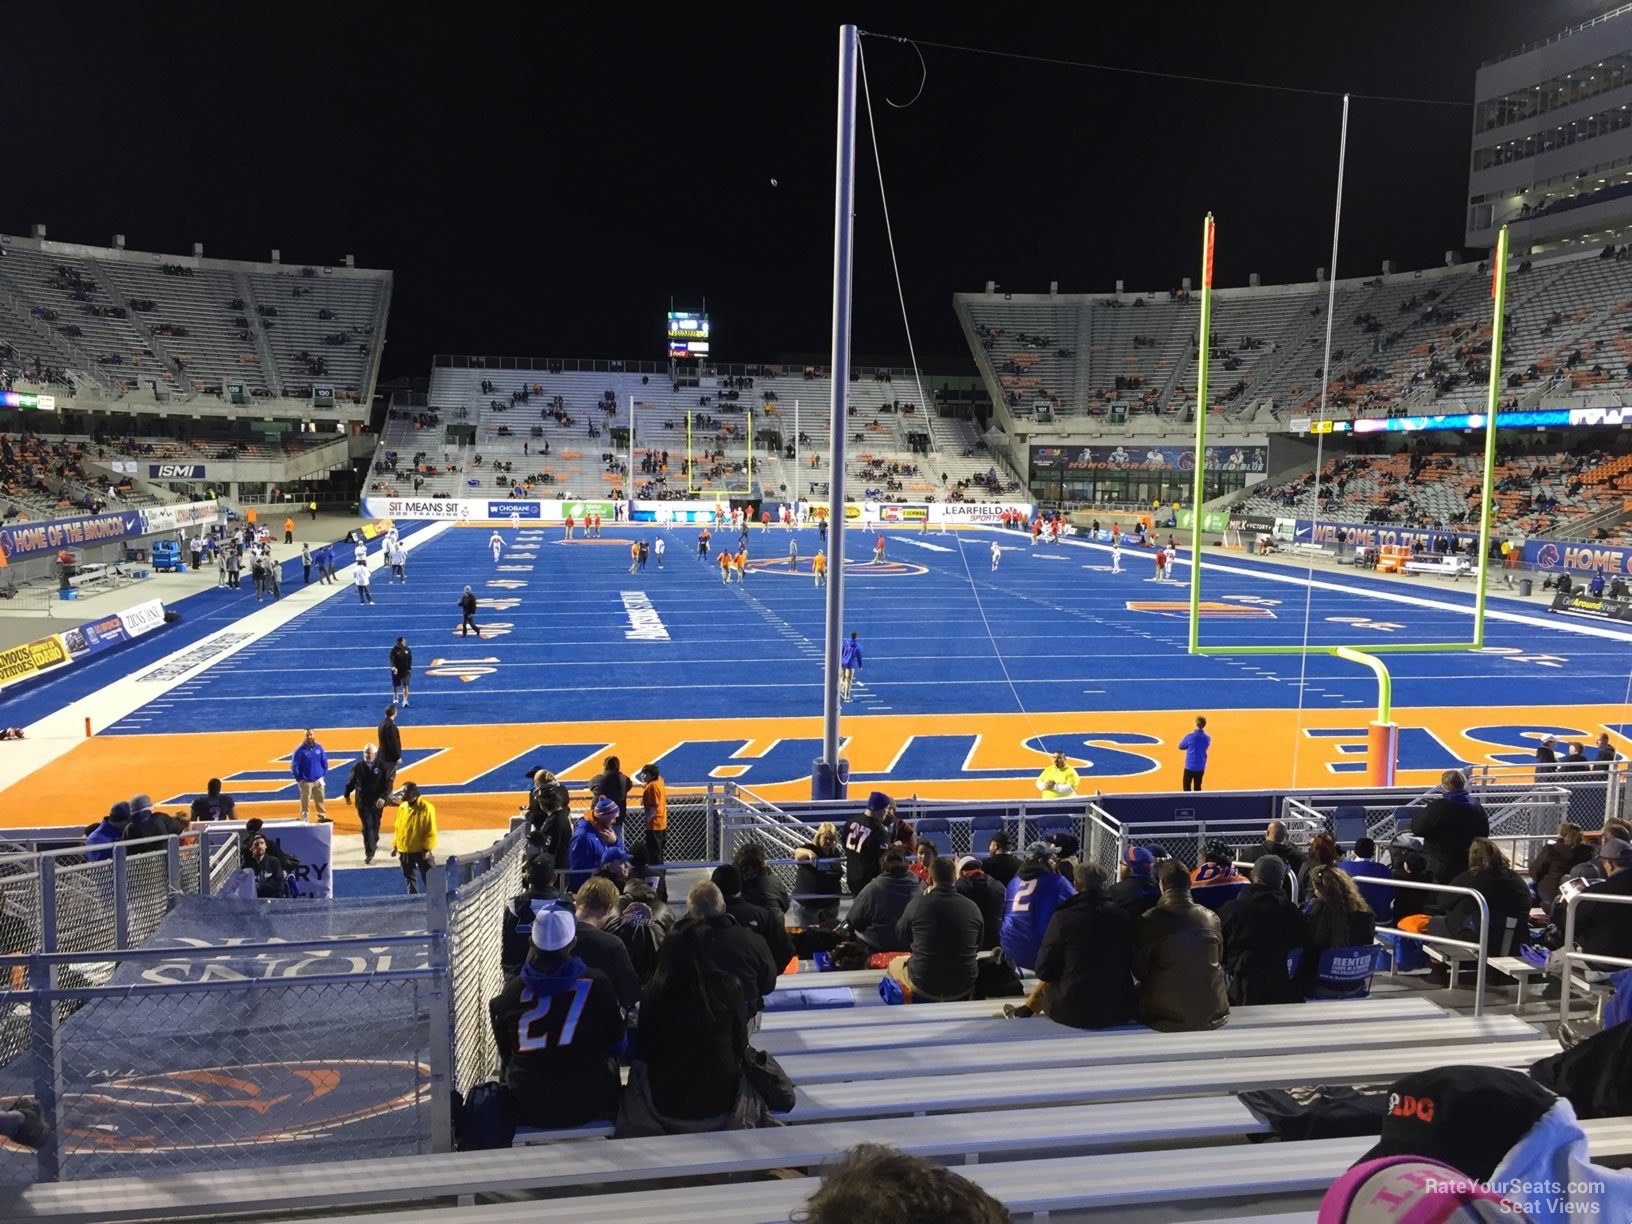 Boise State Football Seating Chart